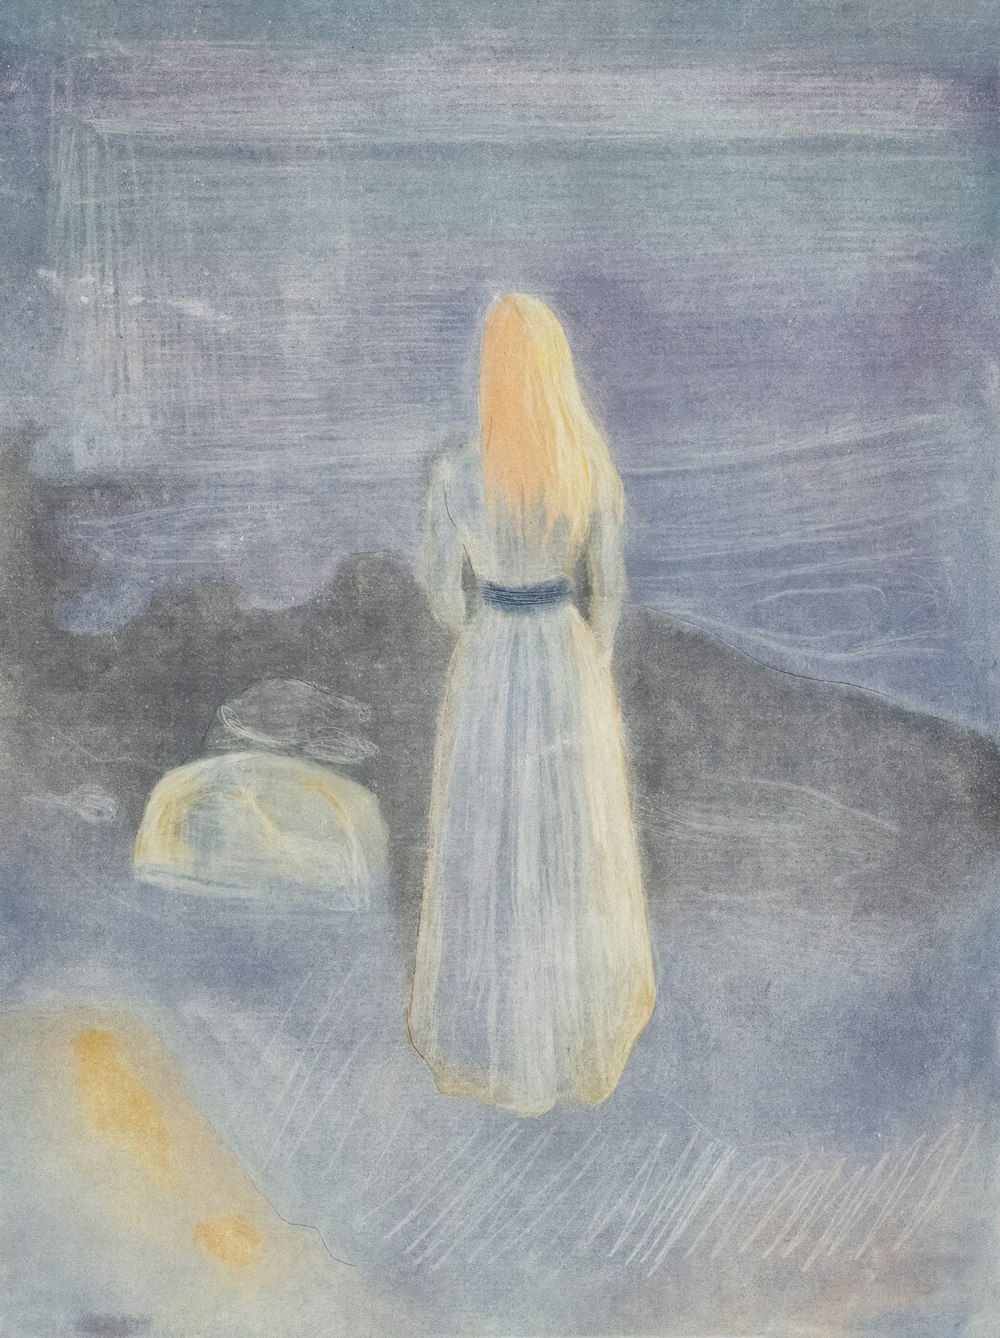 a drawing of a woman in a white dress